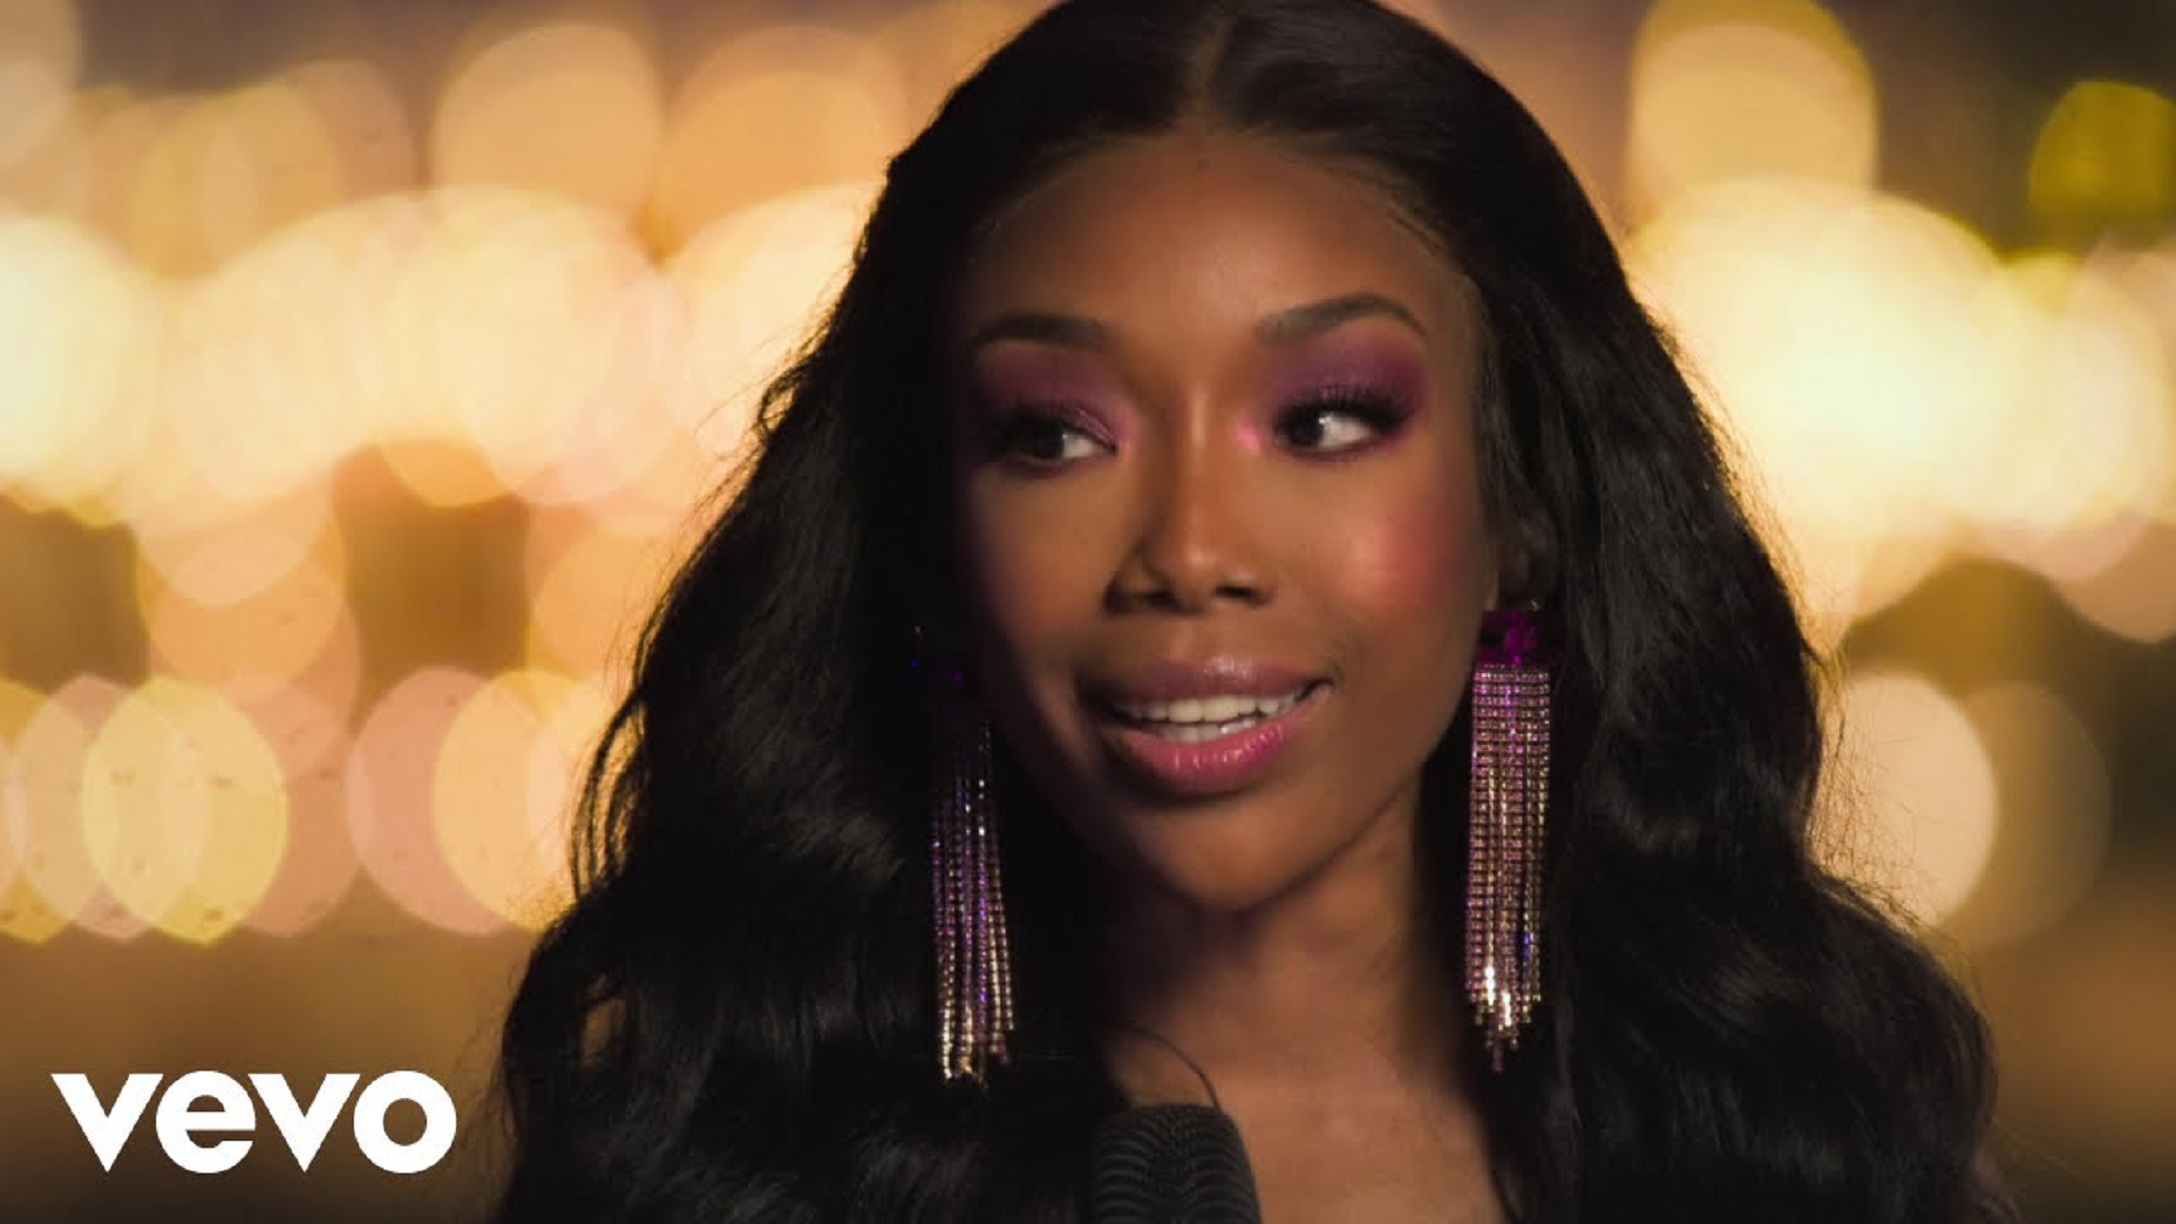 Watch: Brandy Performs ‘Starting Now’ – Theme Song For ‘Disney Princess 2021 Campaign’ At Disney’s World Princess Week